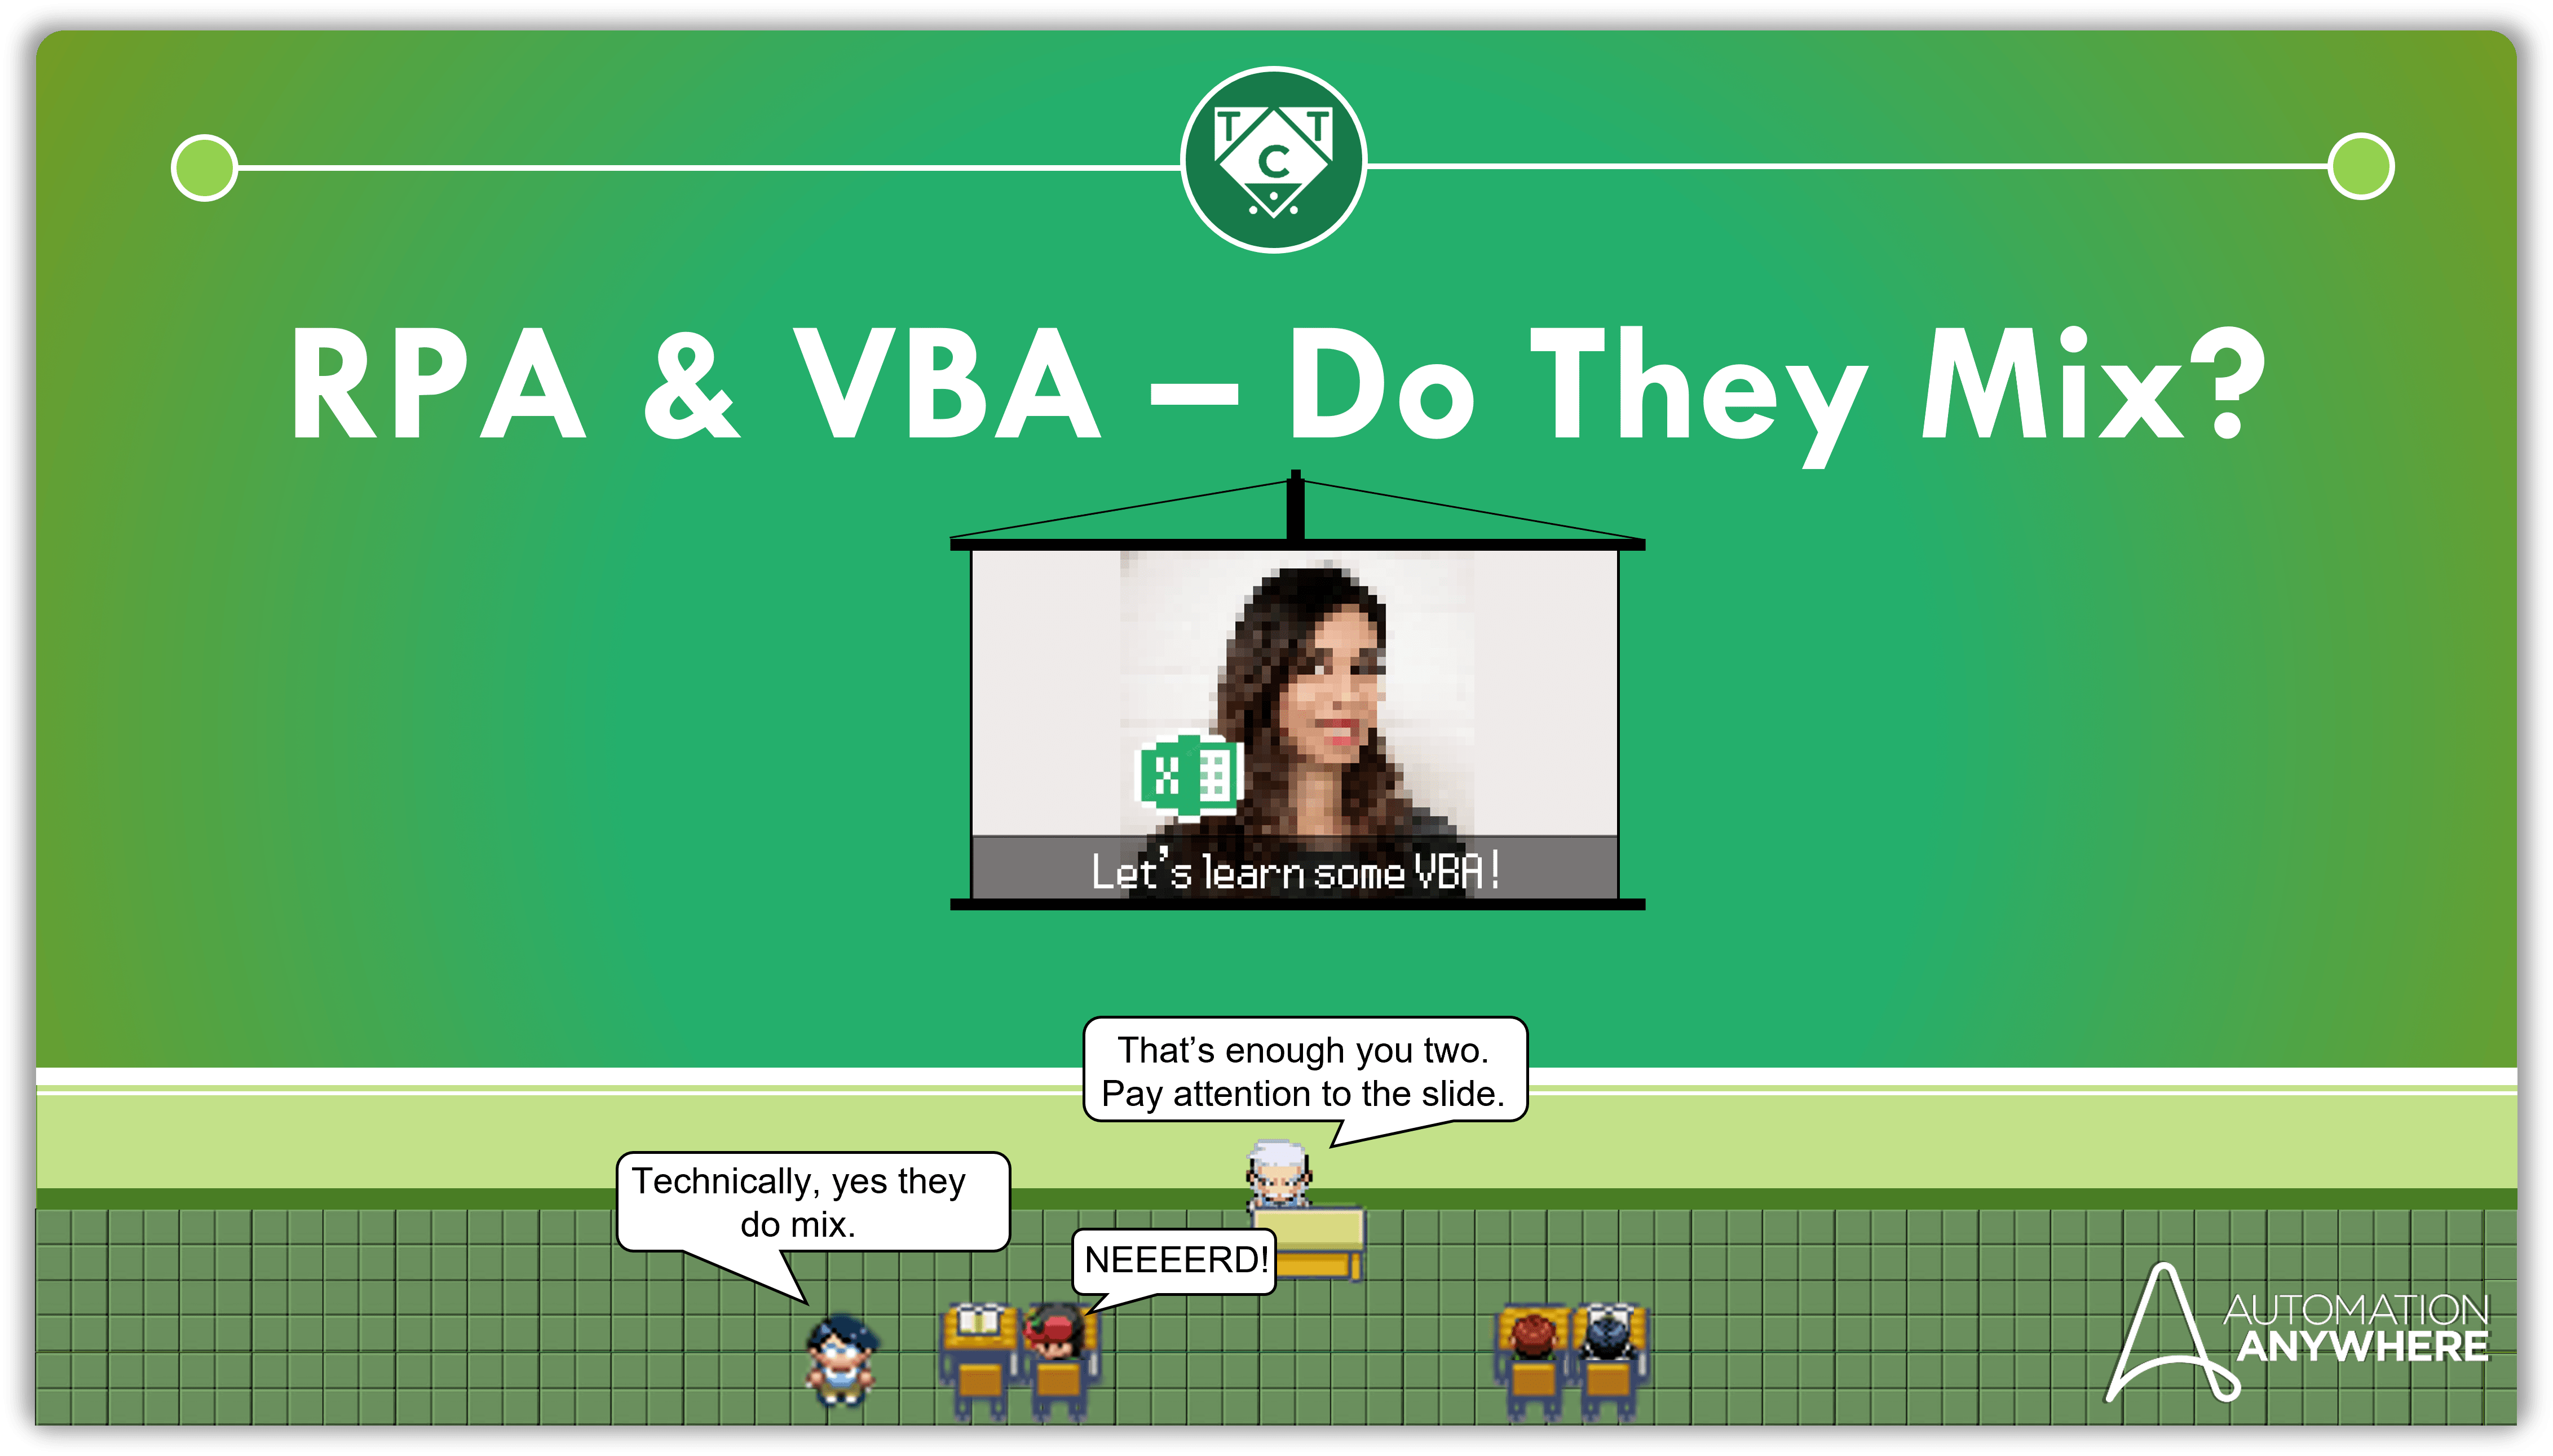 RPA & VBA – Do They Mix?